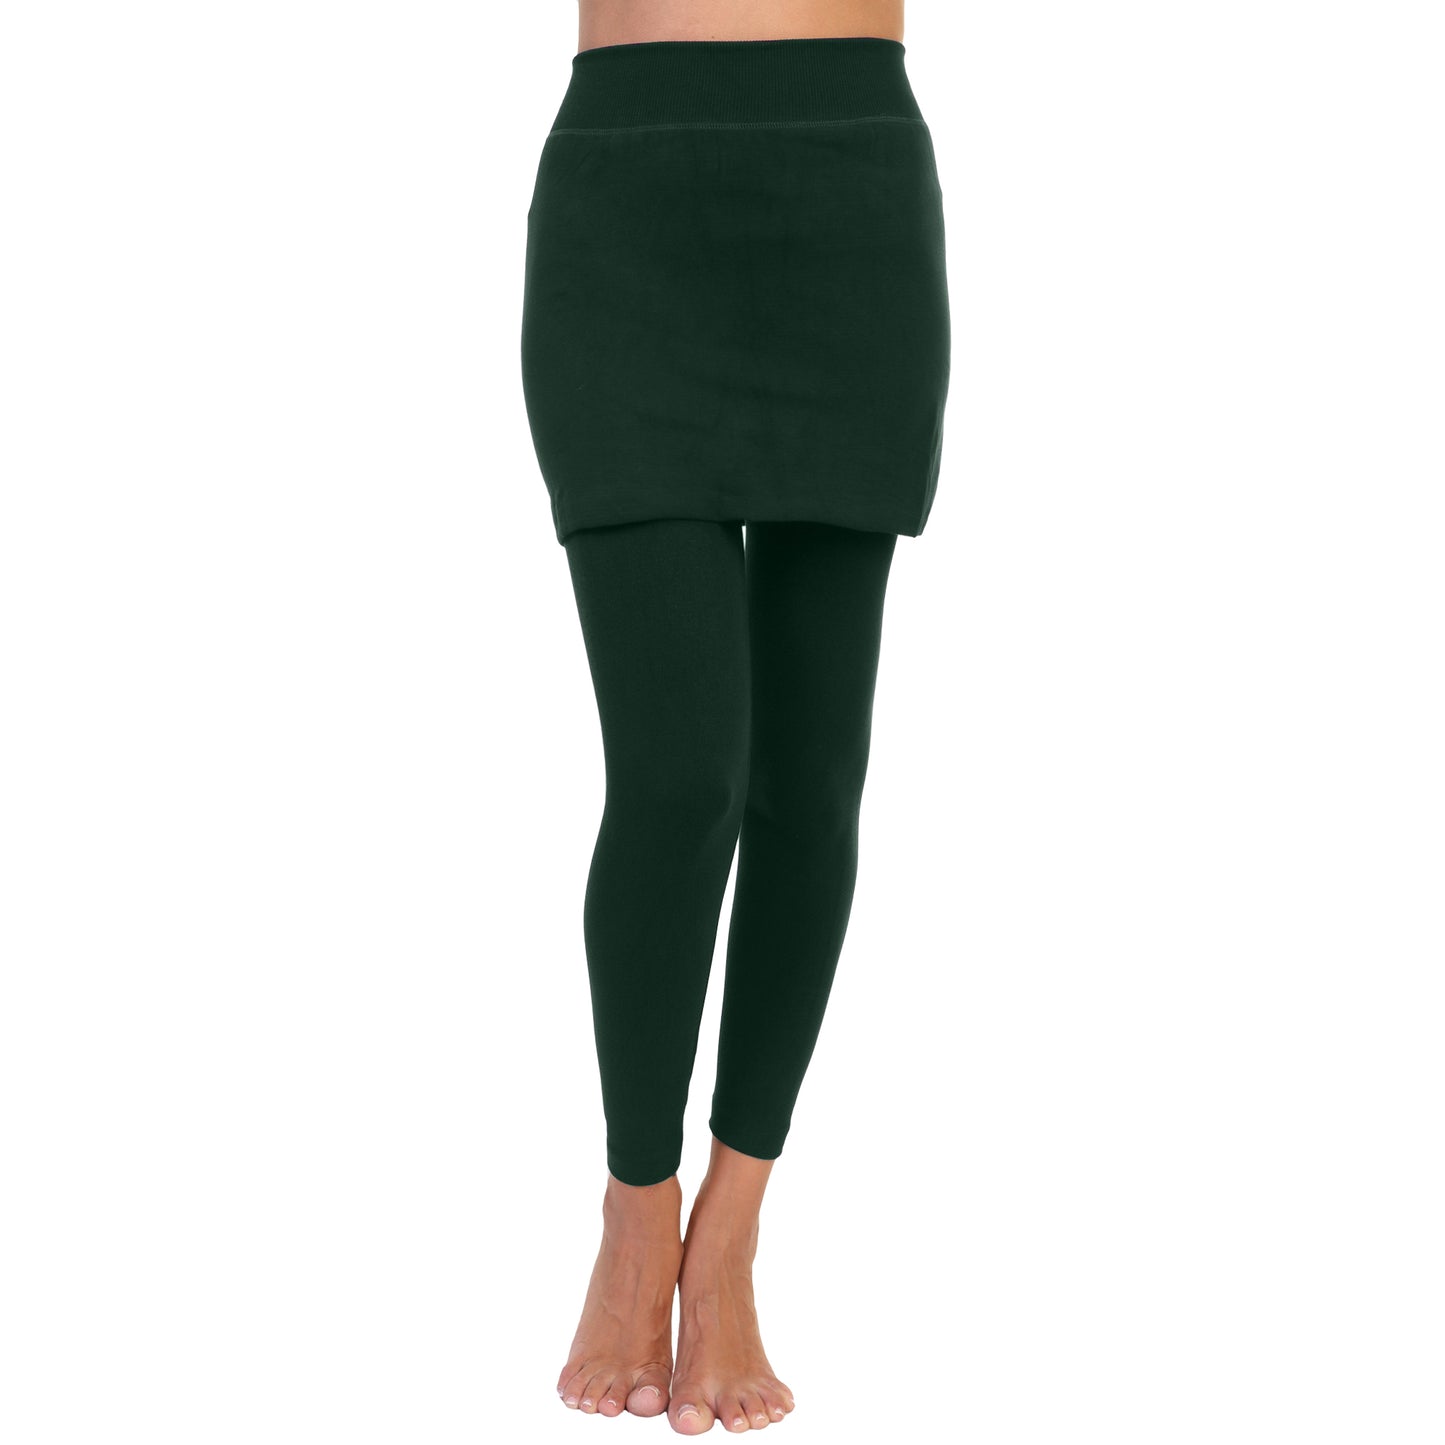 Mini Skirt with Leggings Attached